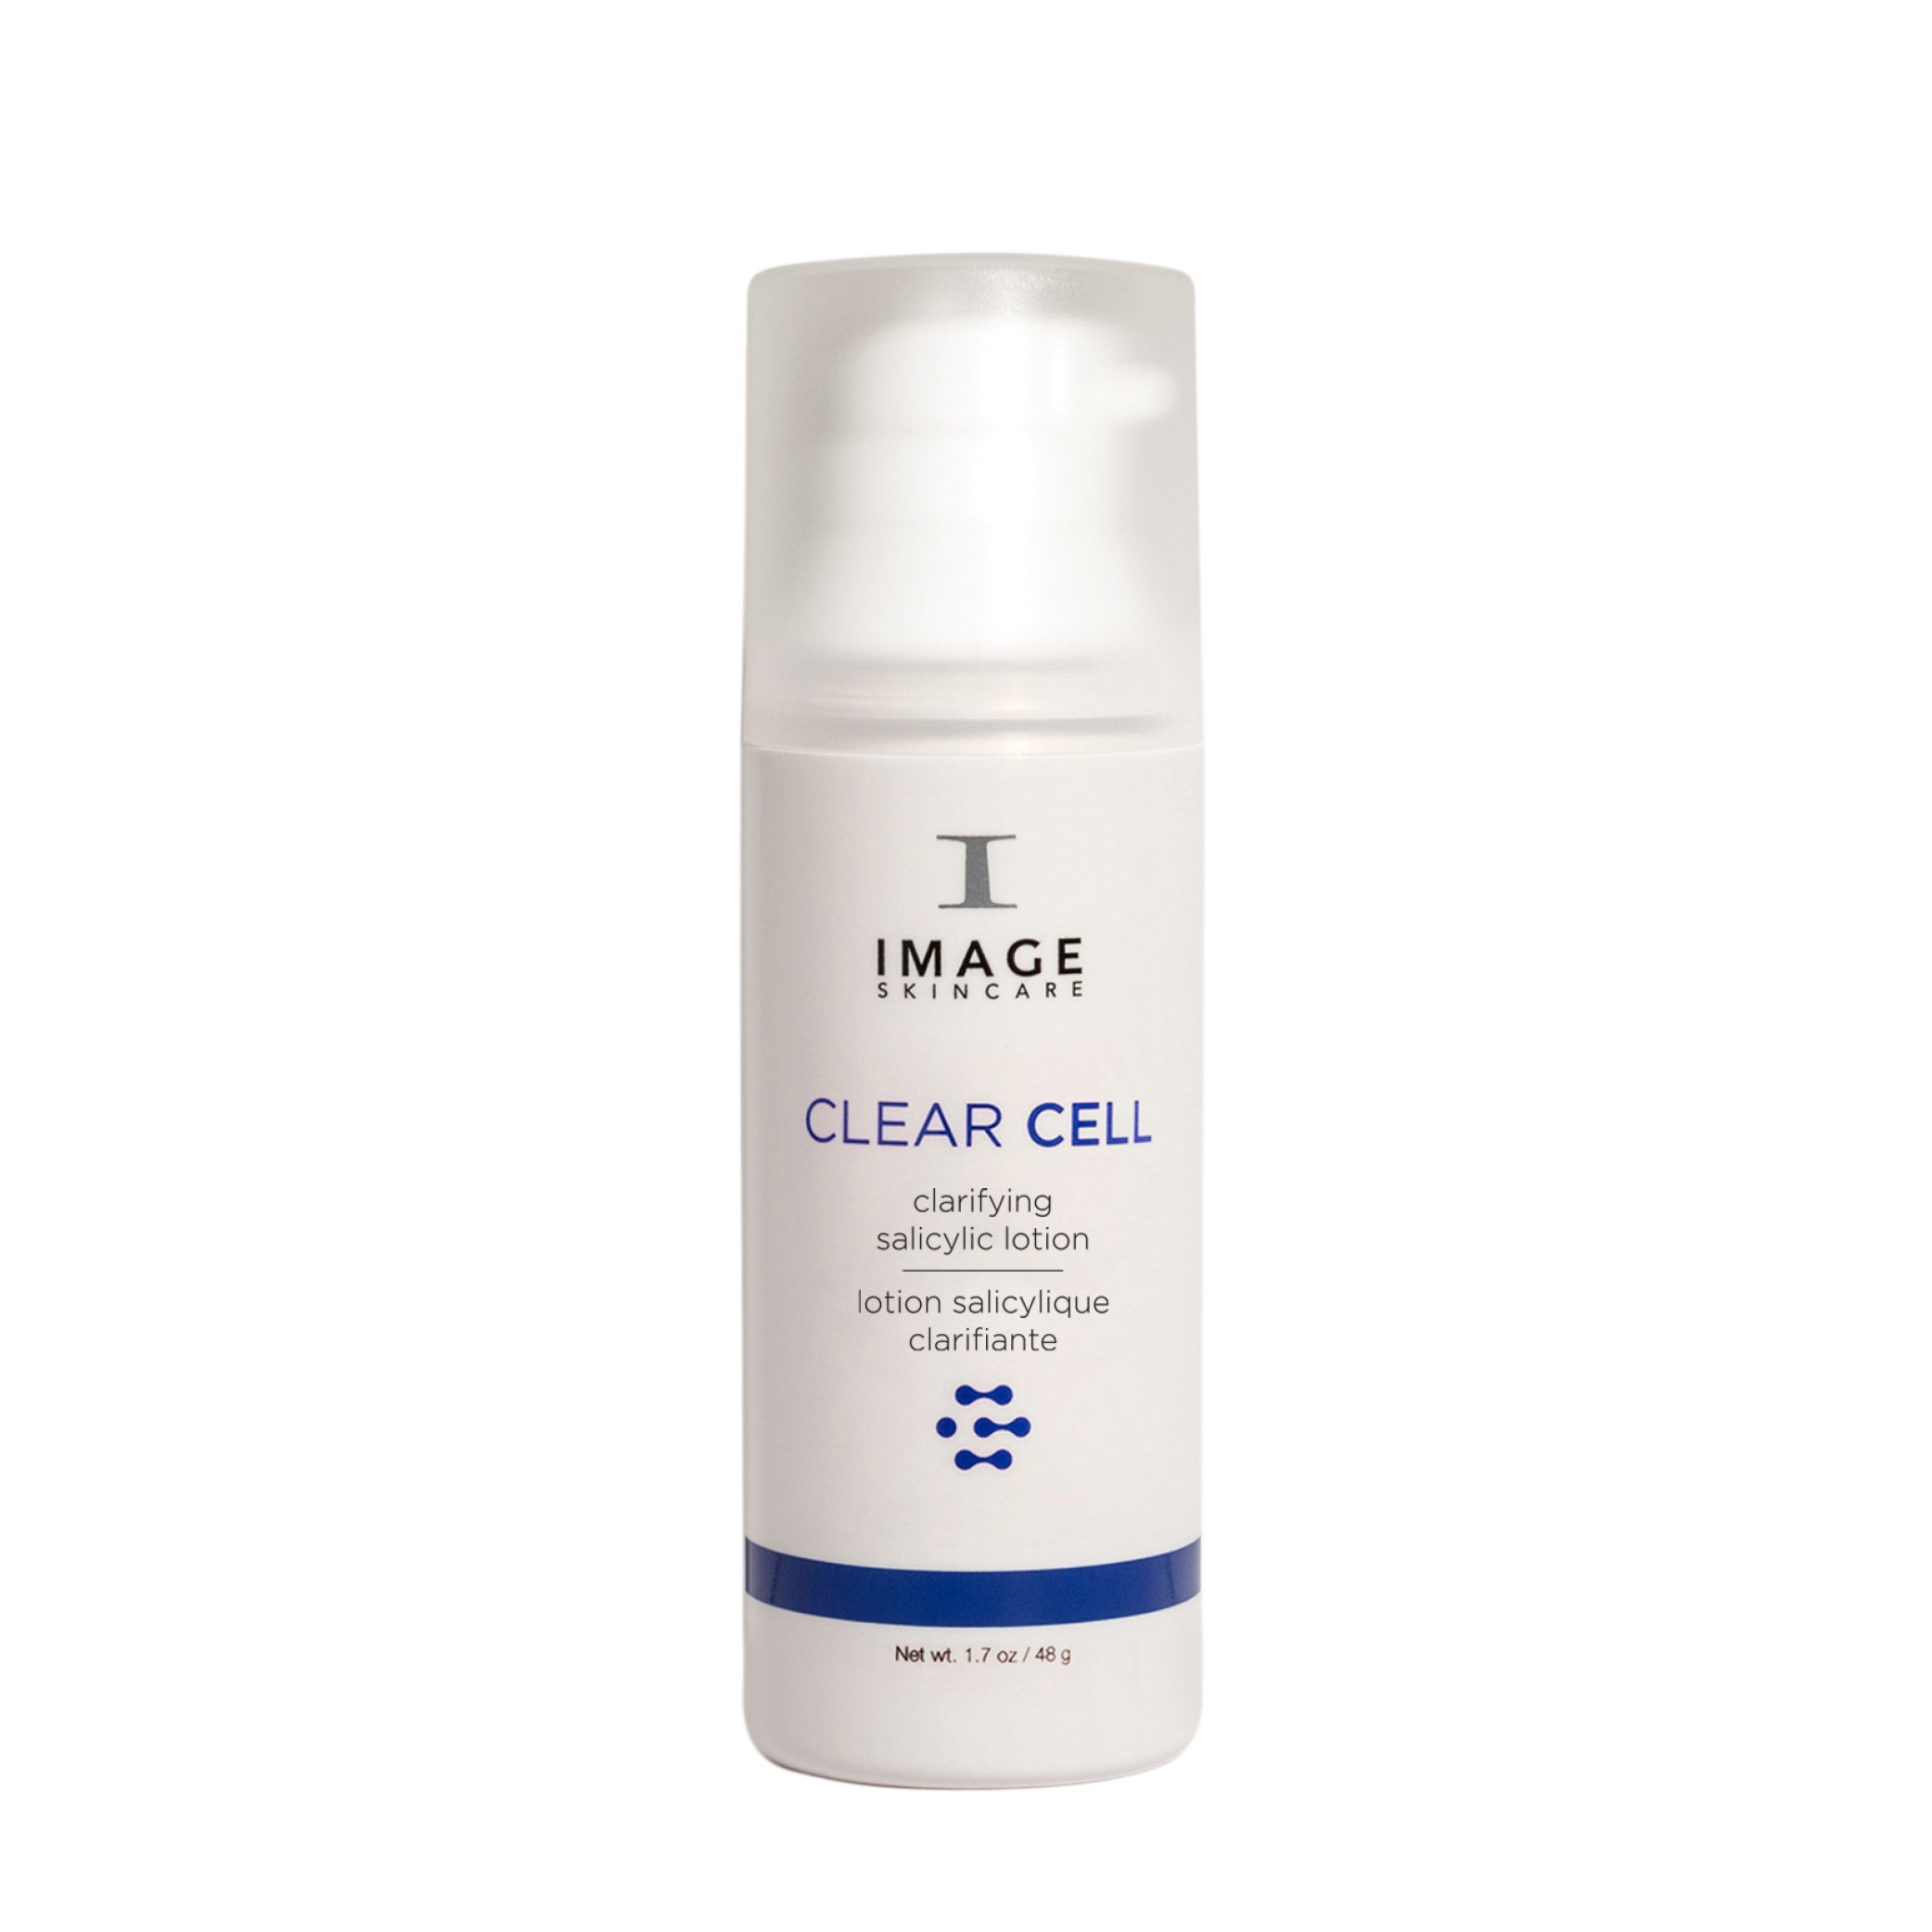 image skincare clear cell medicated acne lotion